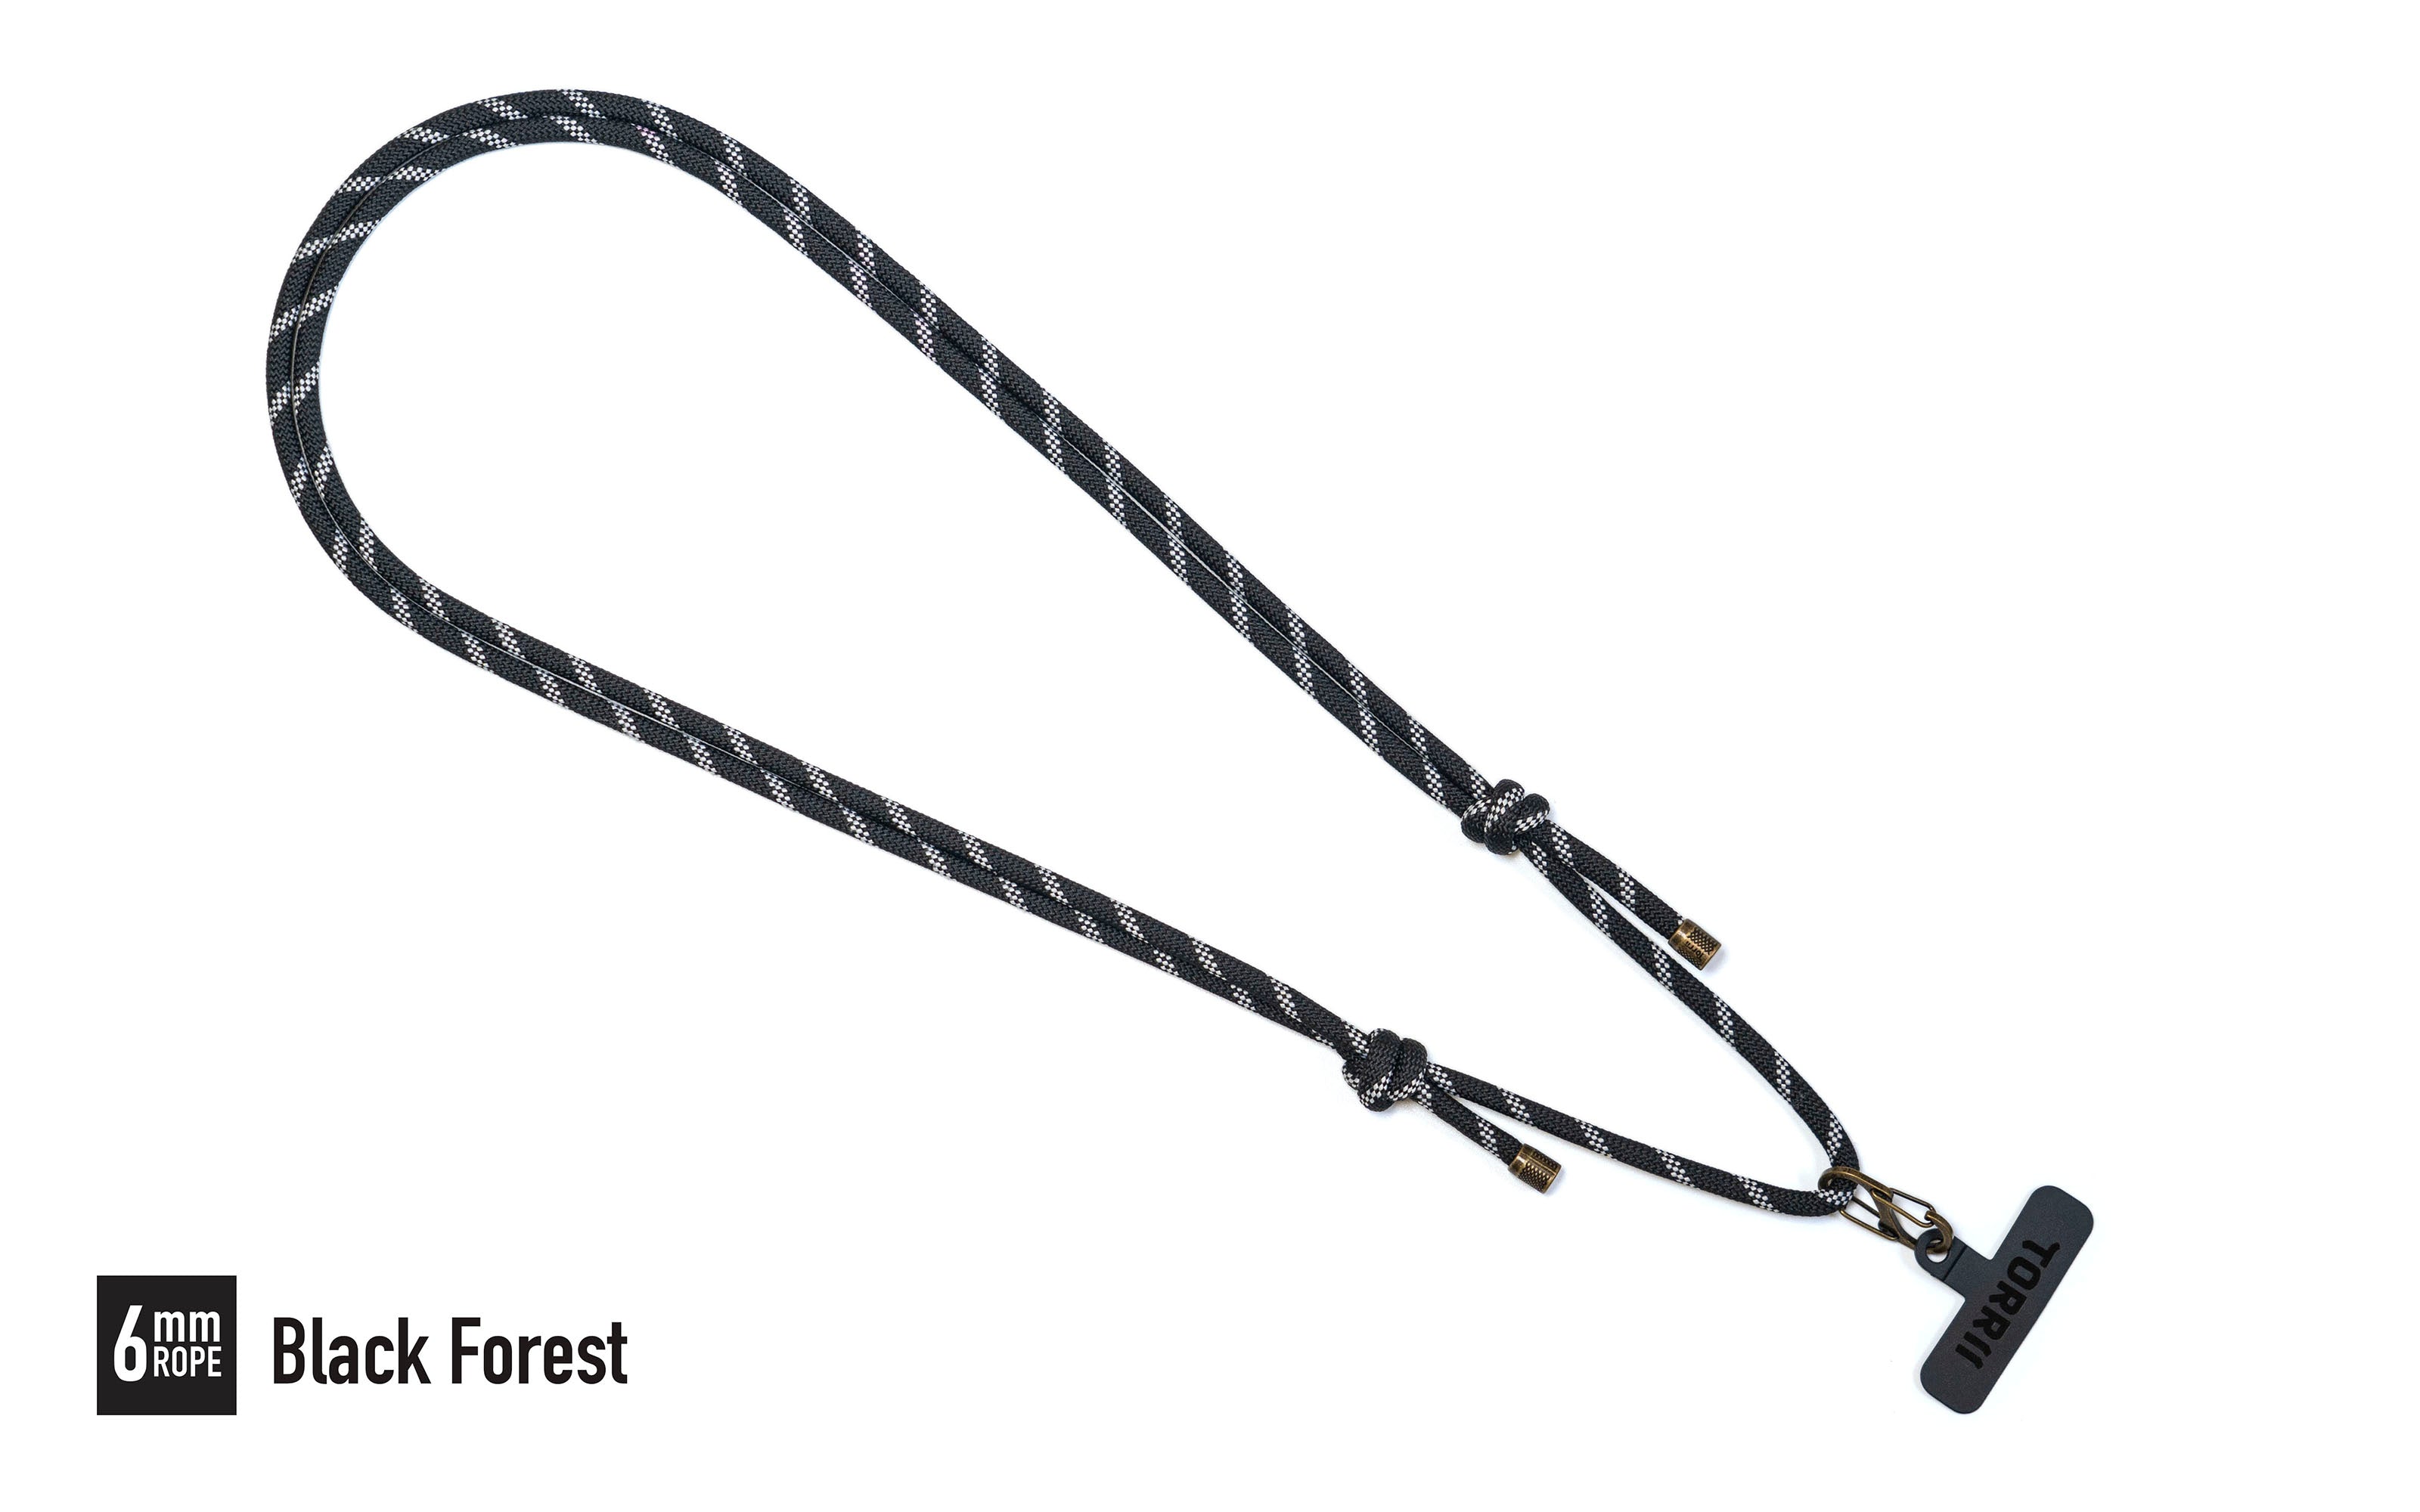 Torrii Knotty 6Mm Rope – Black Forest